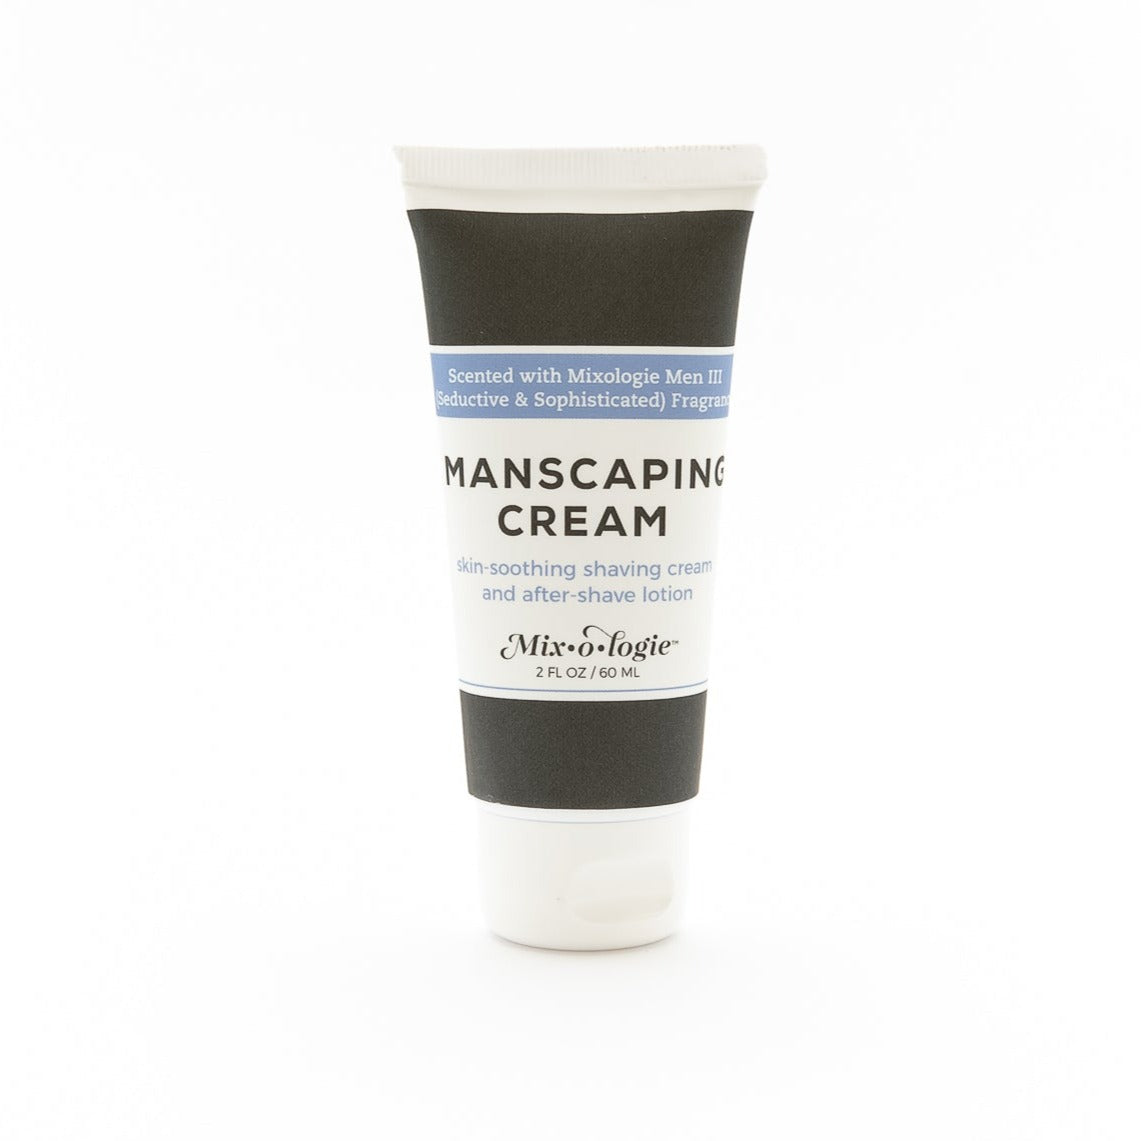 Manscaping Cream Shaving Lotion - Scent III (Seductive & Sophisticated)